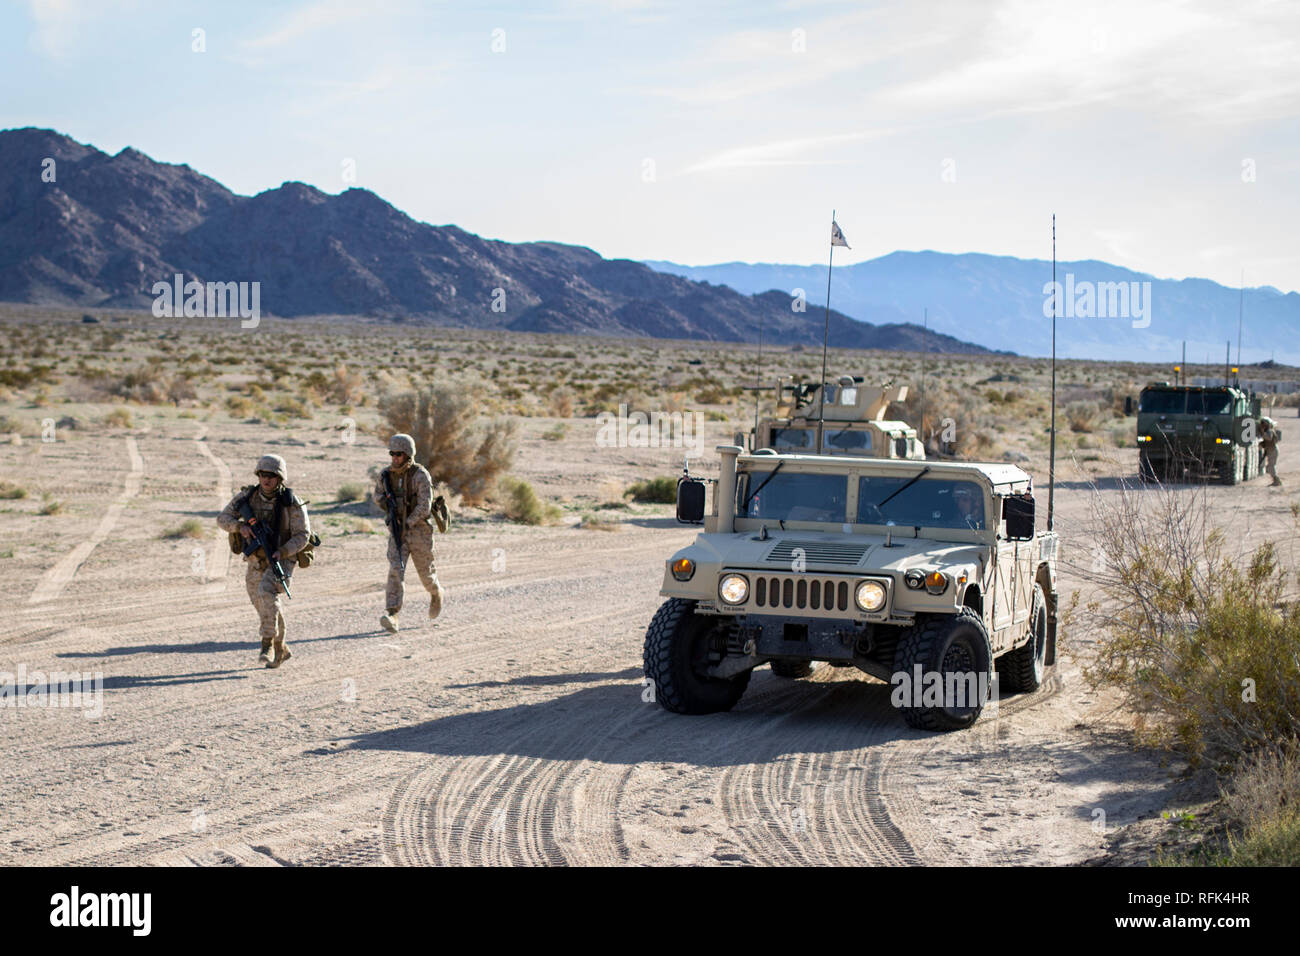 U.S. Marines with Combat Logistics Battalion-6, Marine Air-Ground Task Force-6 (MAGTF-6) conduct a Motorized Operations Course during Integrated Training Exercise (ITX) 2-19 aboard Marine Corps Air-Ground Combat Center Twentynine Palms, Calif., Jan. 24, 2019. ITX creates a challenging, realistic training environment that produces combat-ready forces capable of operating as an integrated MAGTF. (U.S. Marine Corps photo by Sgt. Victor A. Mancilla) Stock Photo